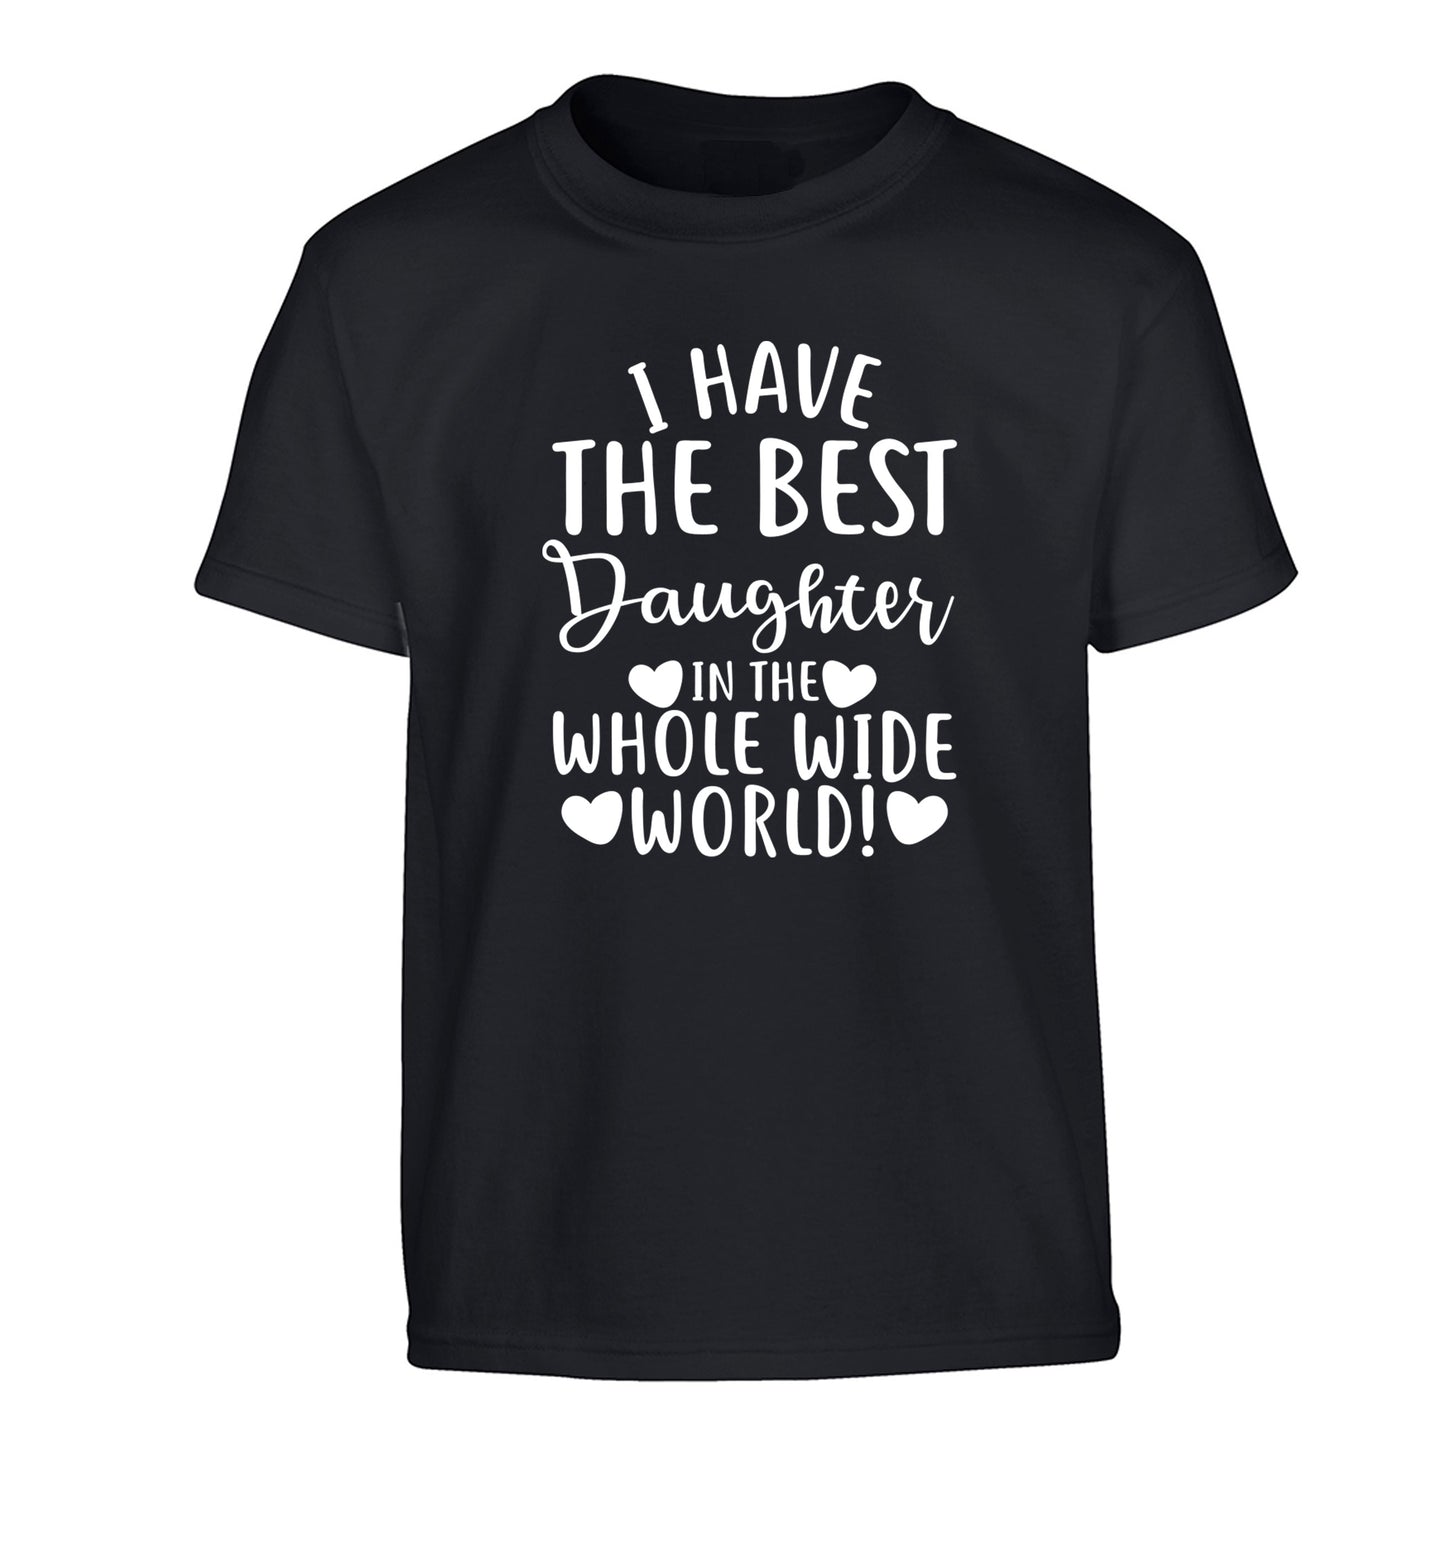 I have the best daughter in the whole wide world! Children's black Tshirt 12-13 Years